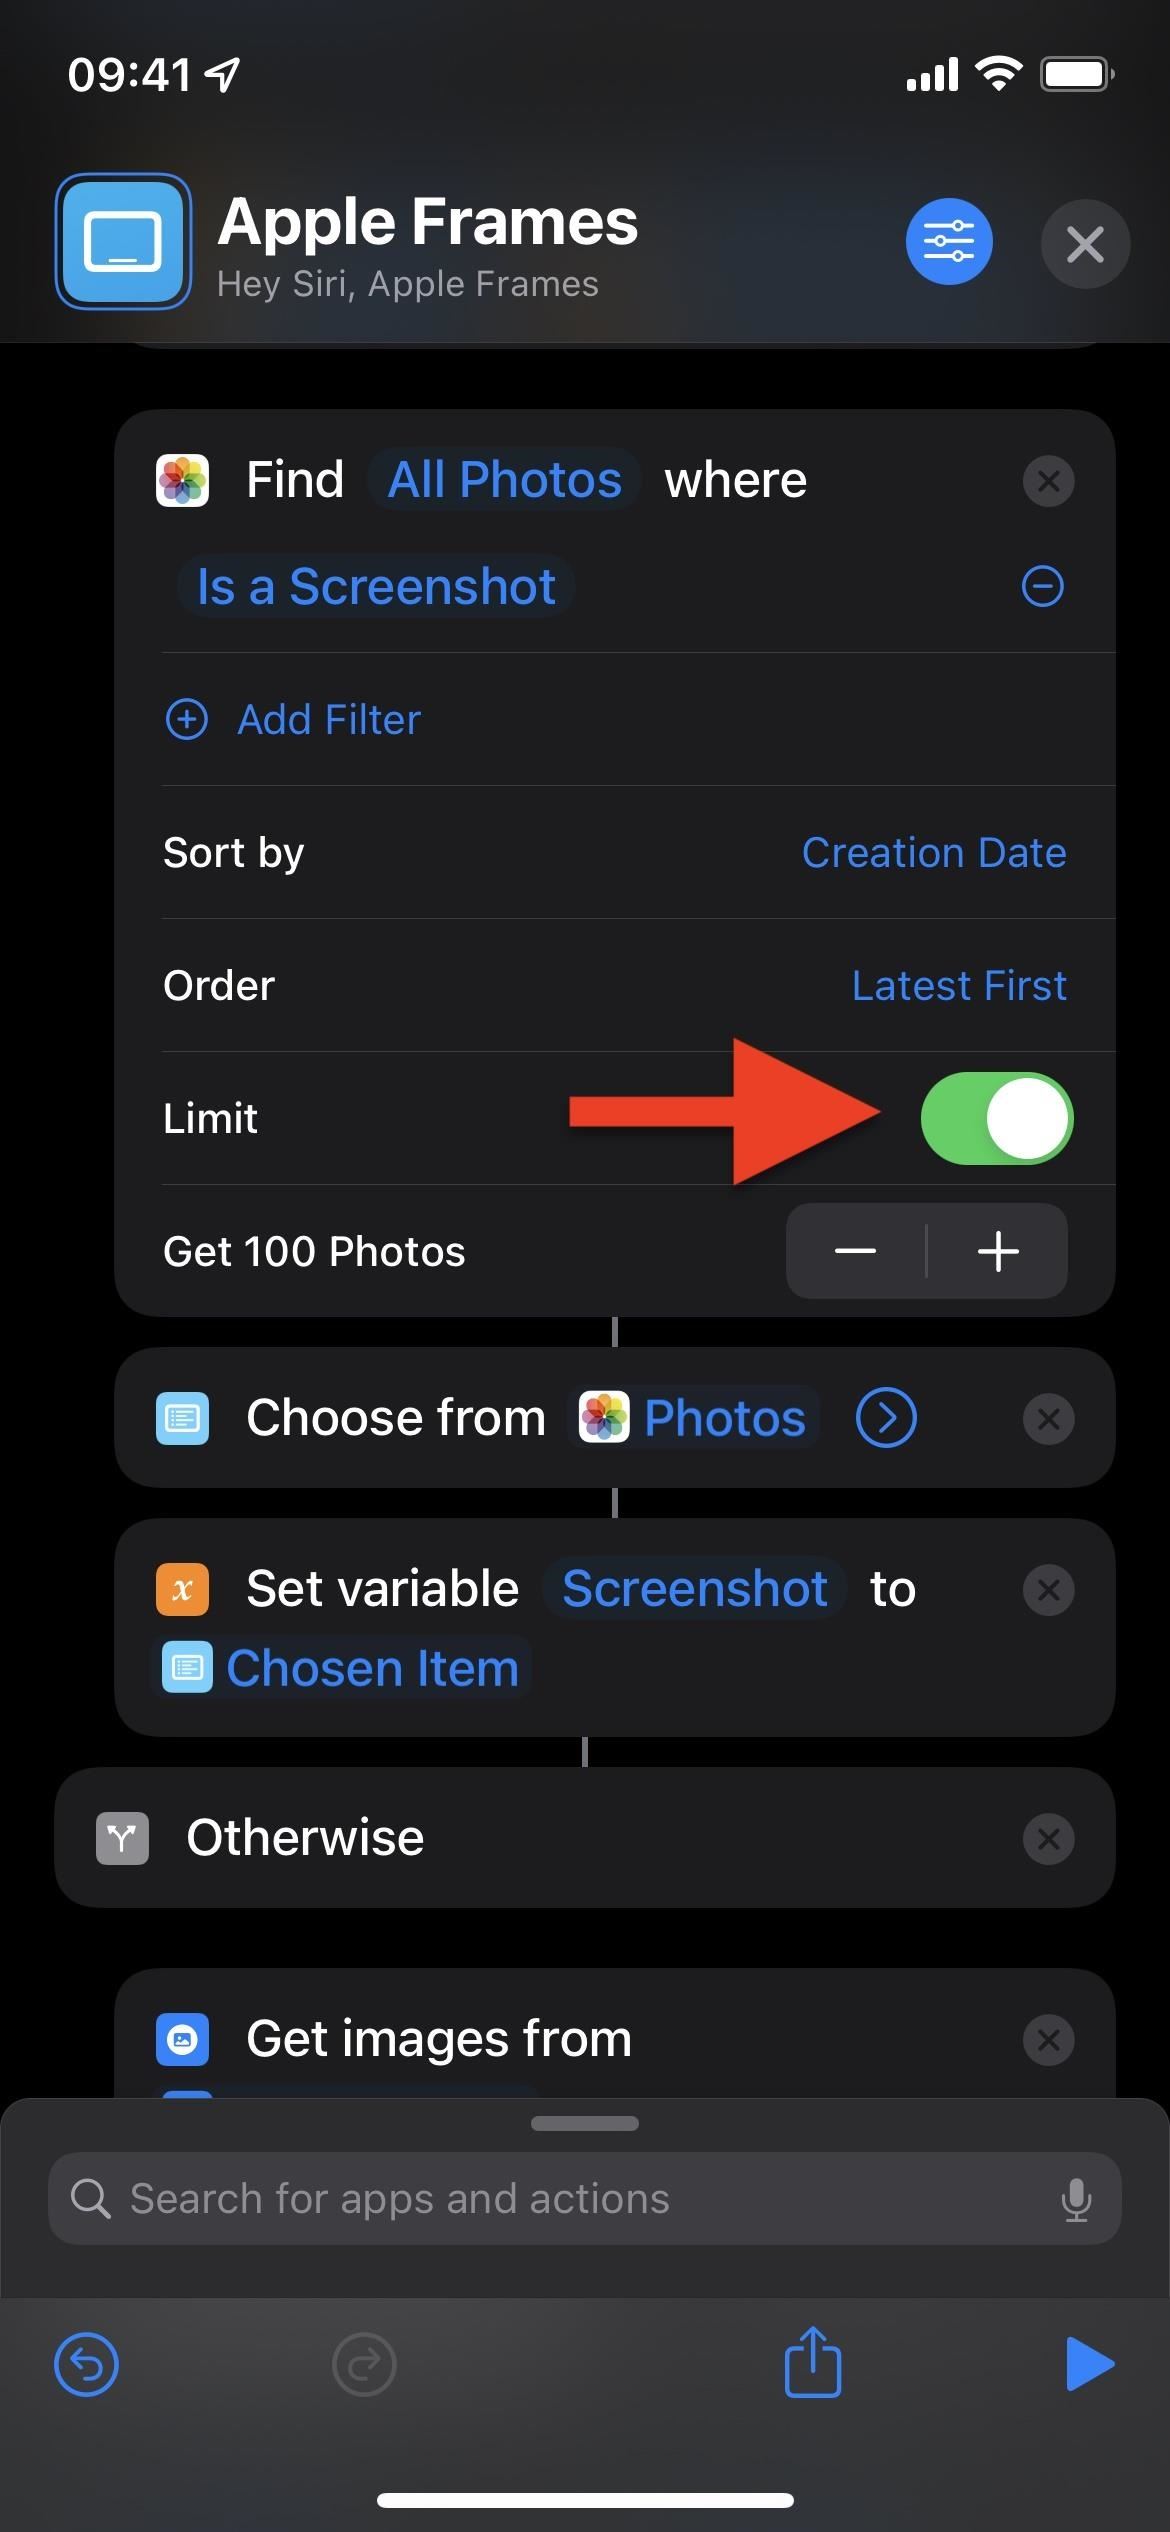 Cool Shortcut: Frame Screenshots with Your iPhone or iPad's Body for Pro-Style Images